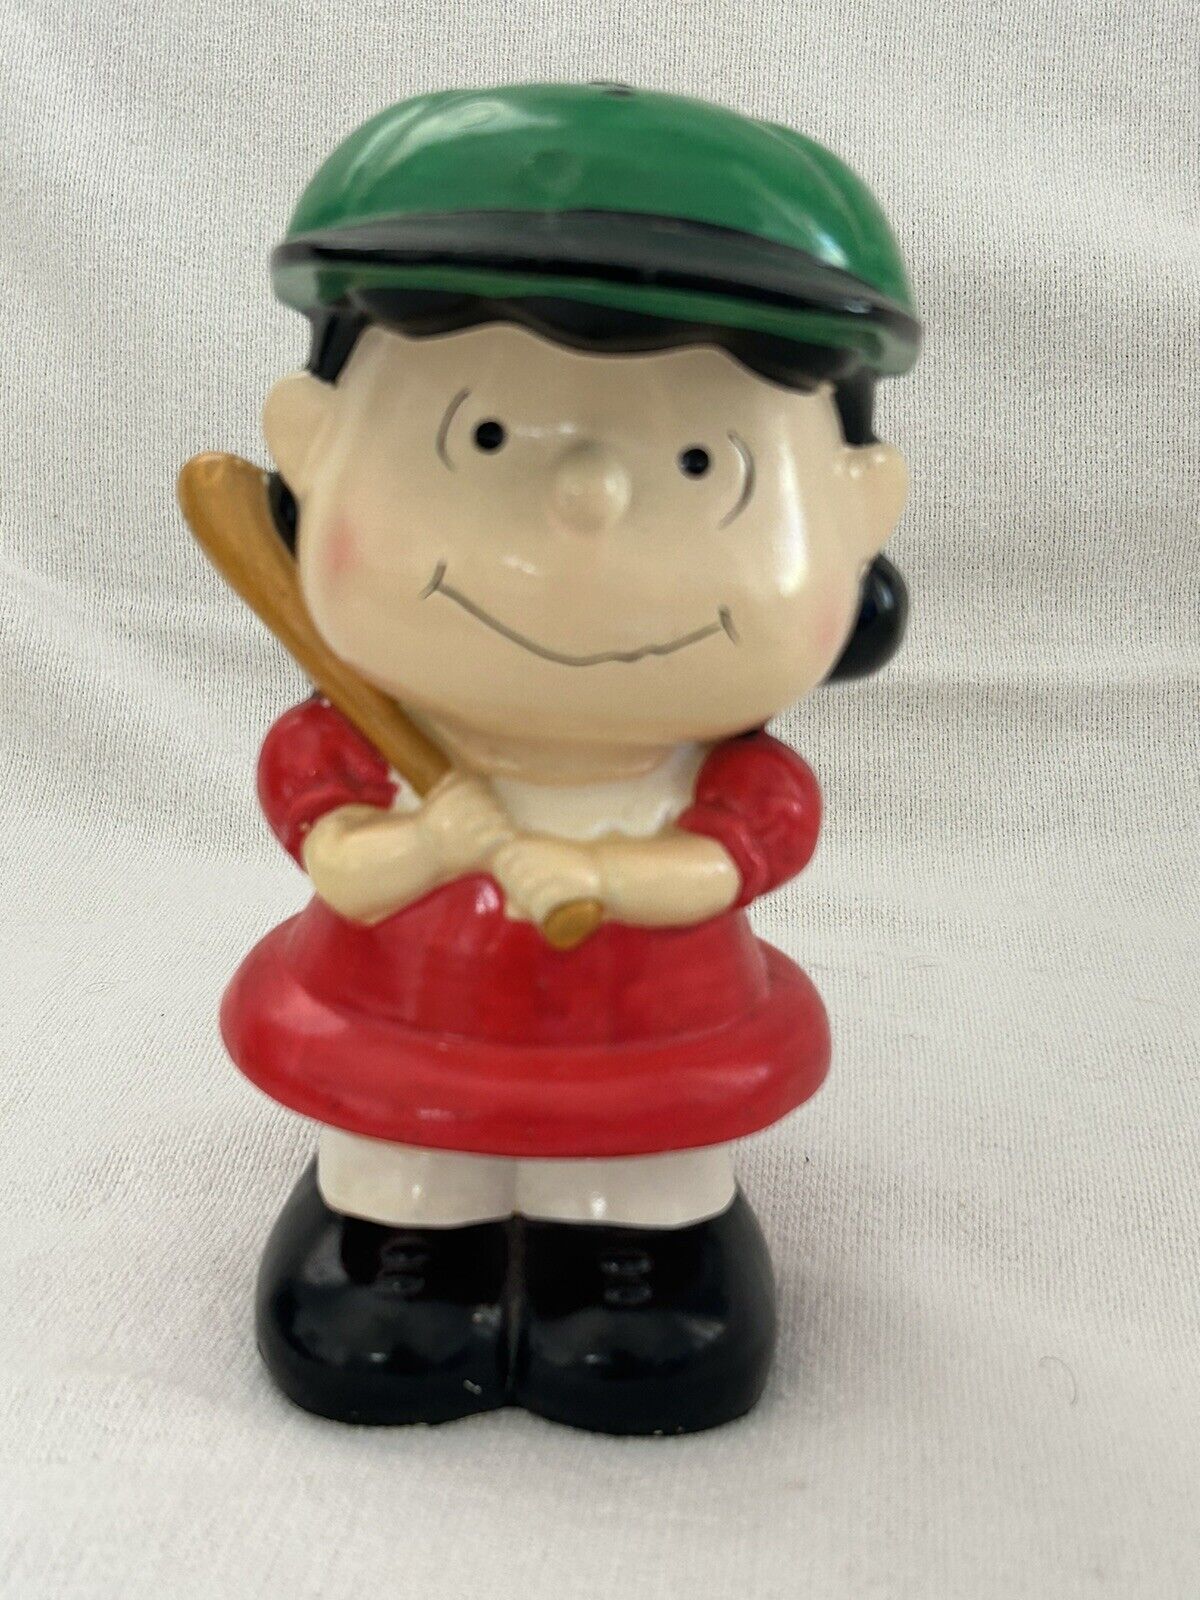 Vintage Peanuts Lucy Determined Baseball Ceramic Bank Pre-owned